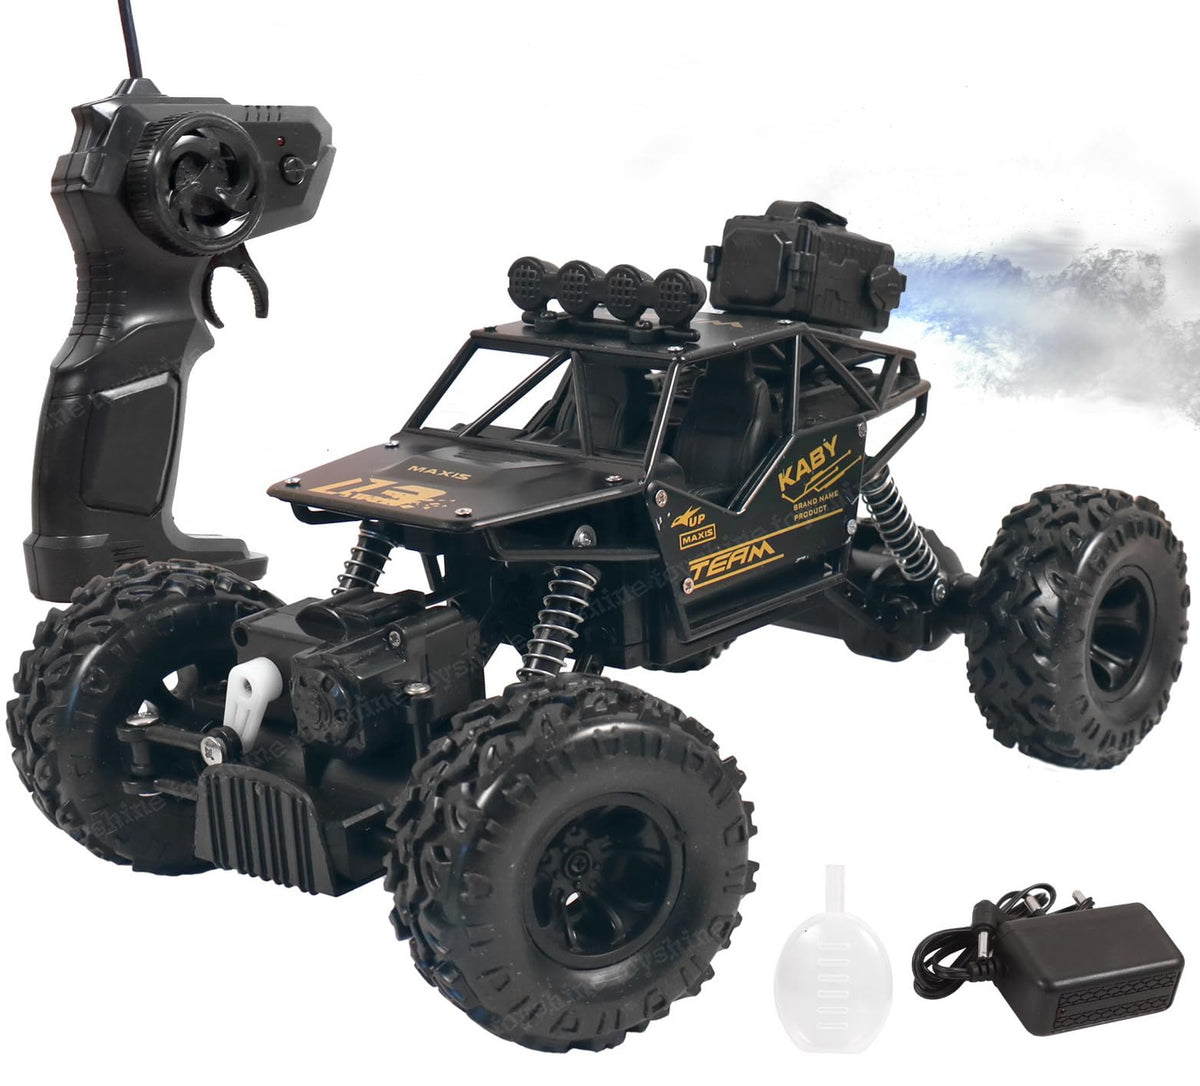 1:16 Scale 27MHZ Rock Crawler Monster RC Truck with Booster Spray Function All Terrain Stunt Racing Car Rechargeable Indoor Outdoor Toy Car